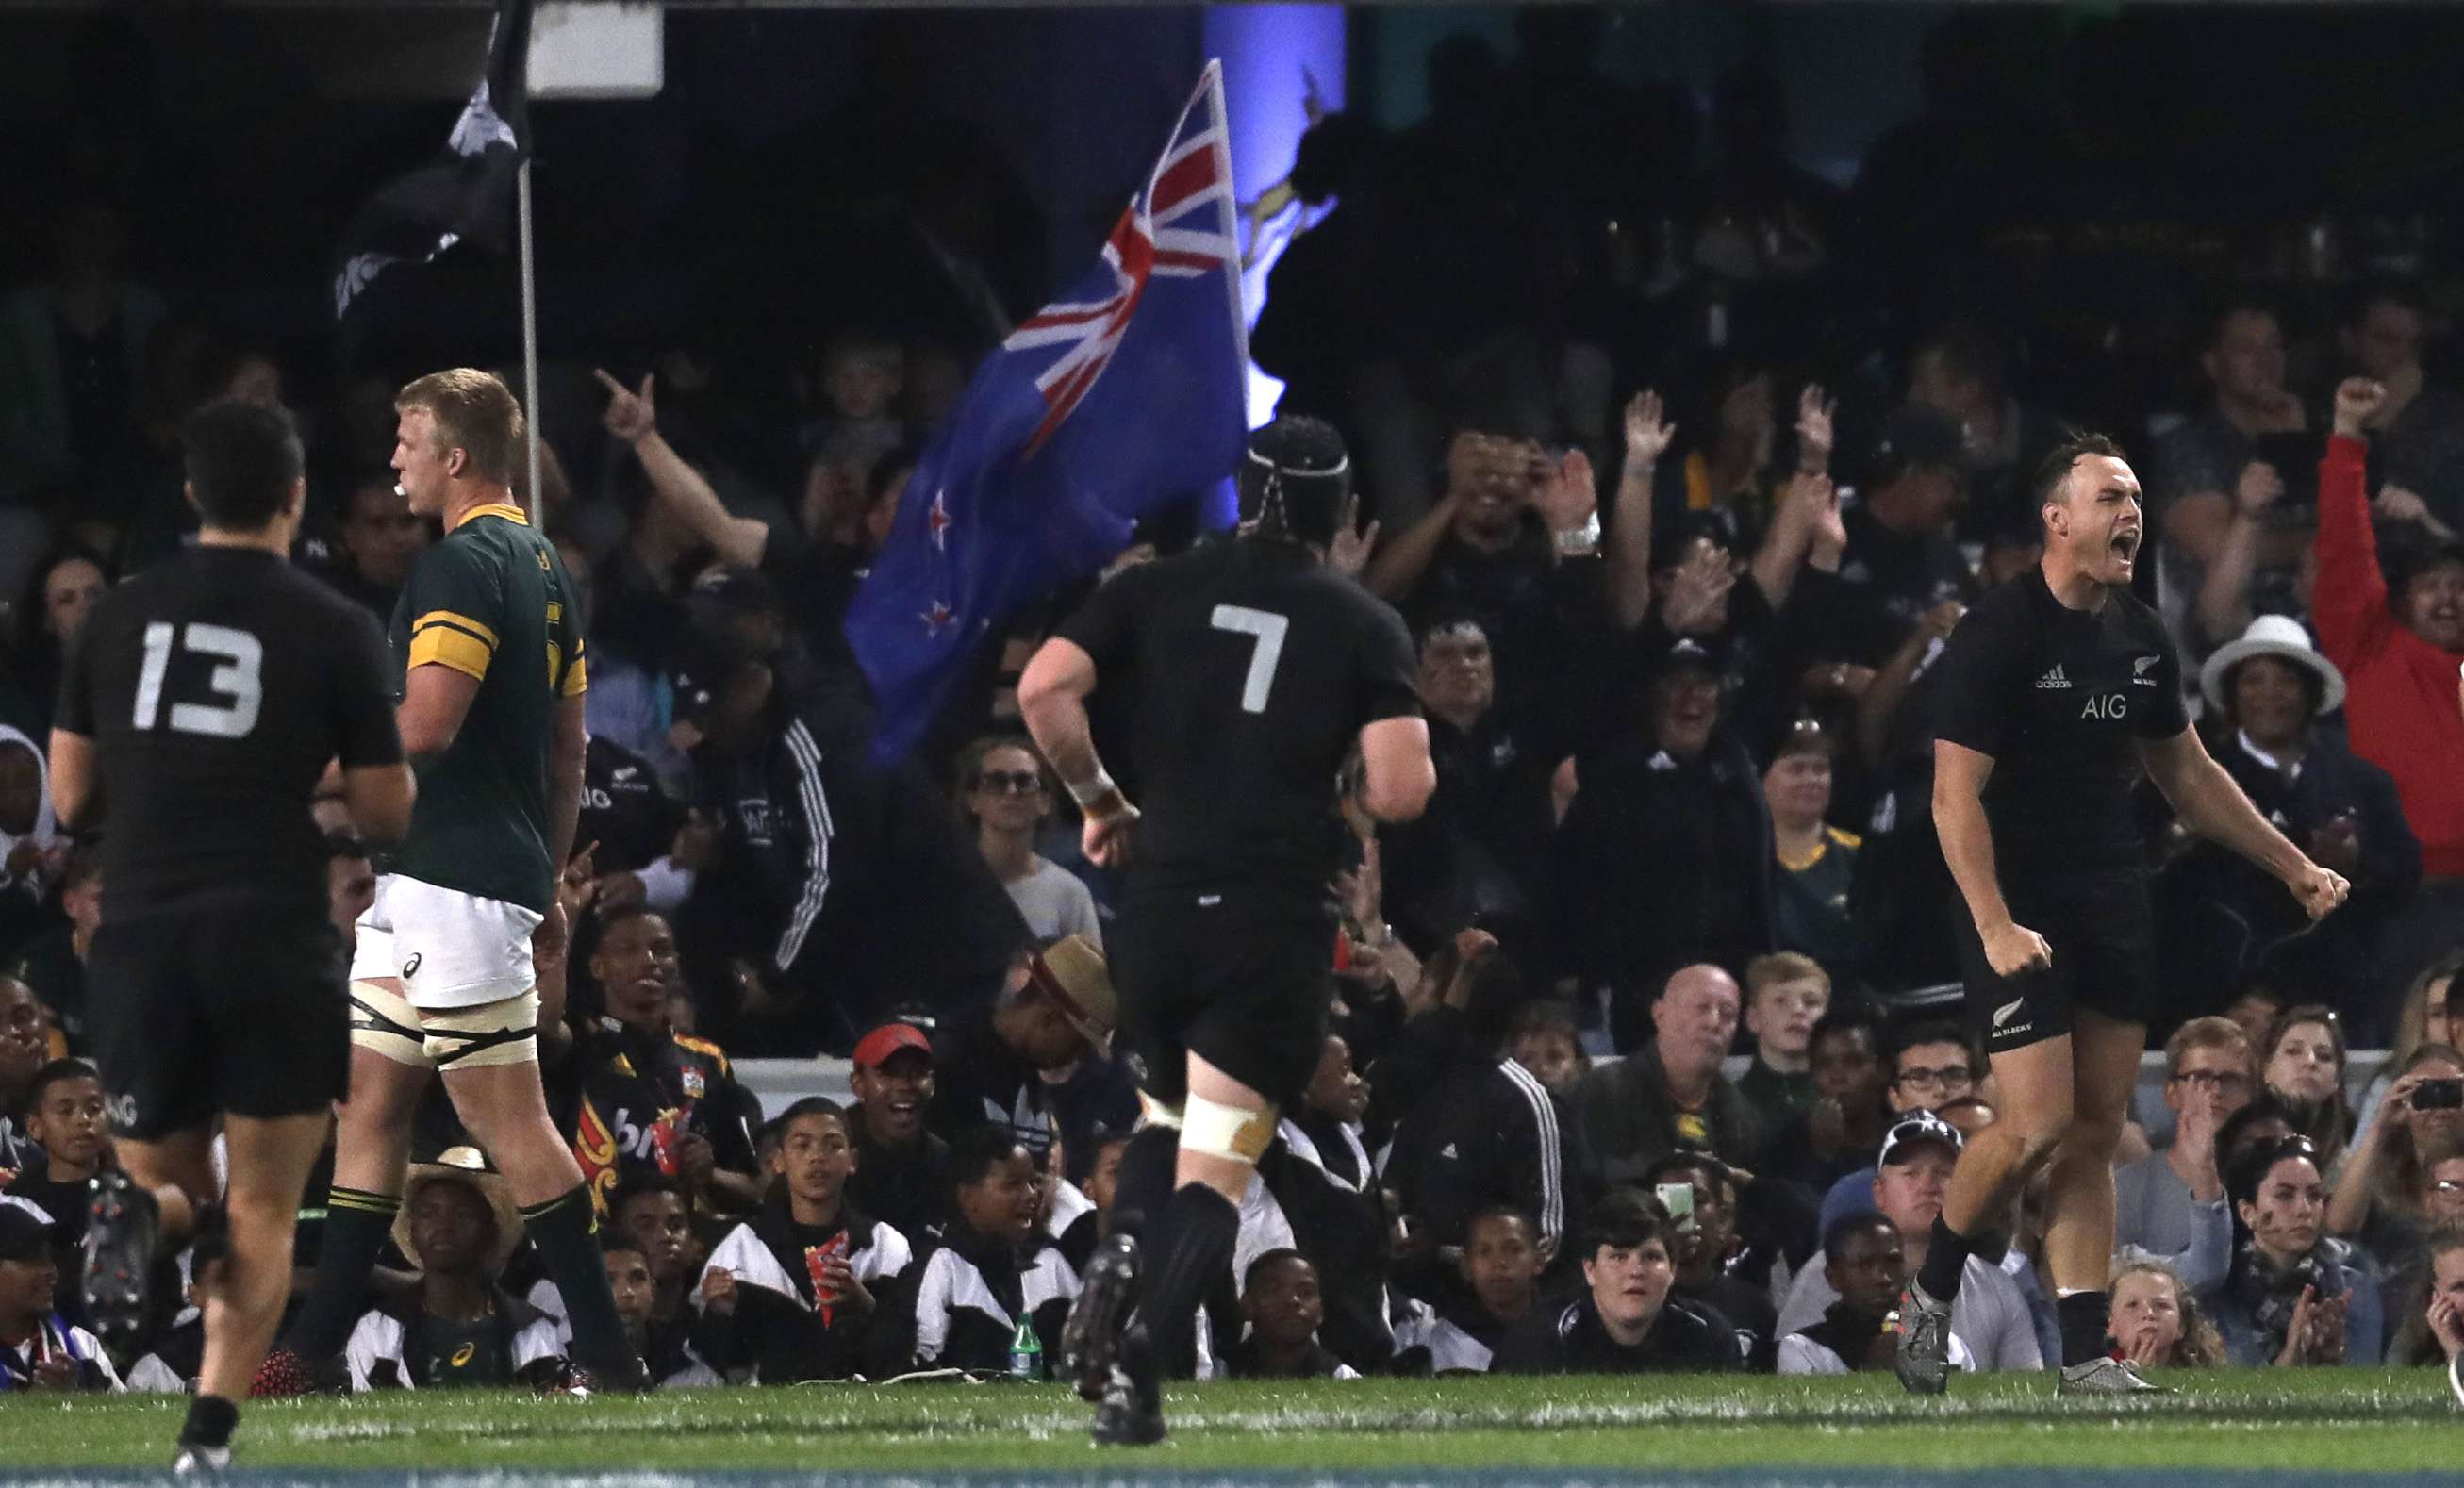 New Zealand’s Israel Dagg (right) reacts after scoring a try during the rugby championship match between South Africa and New Zealand. Photo: AP